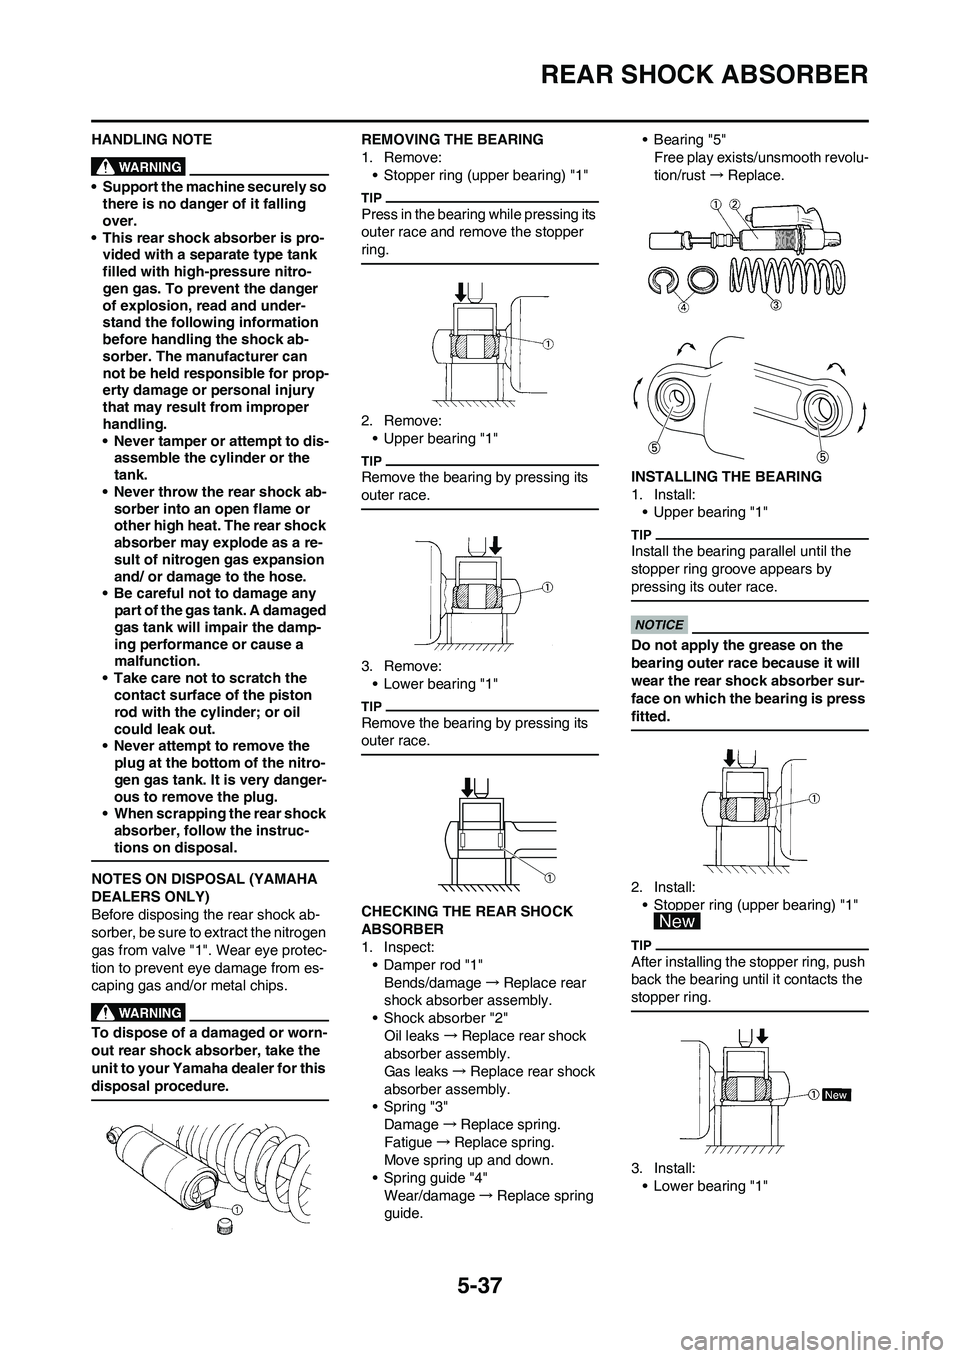 YAMAHA YZ250F 2009  Owners Manual 5-37
REAR SHOCK ABSORBER
HANDLING NOTE
• Support the machine securely so 
there is no danger of it falling 
over.
• This rear shock absorber is pro-
vided with a separate type tank 
filled with hi